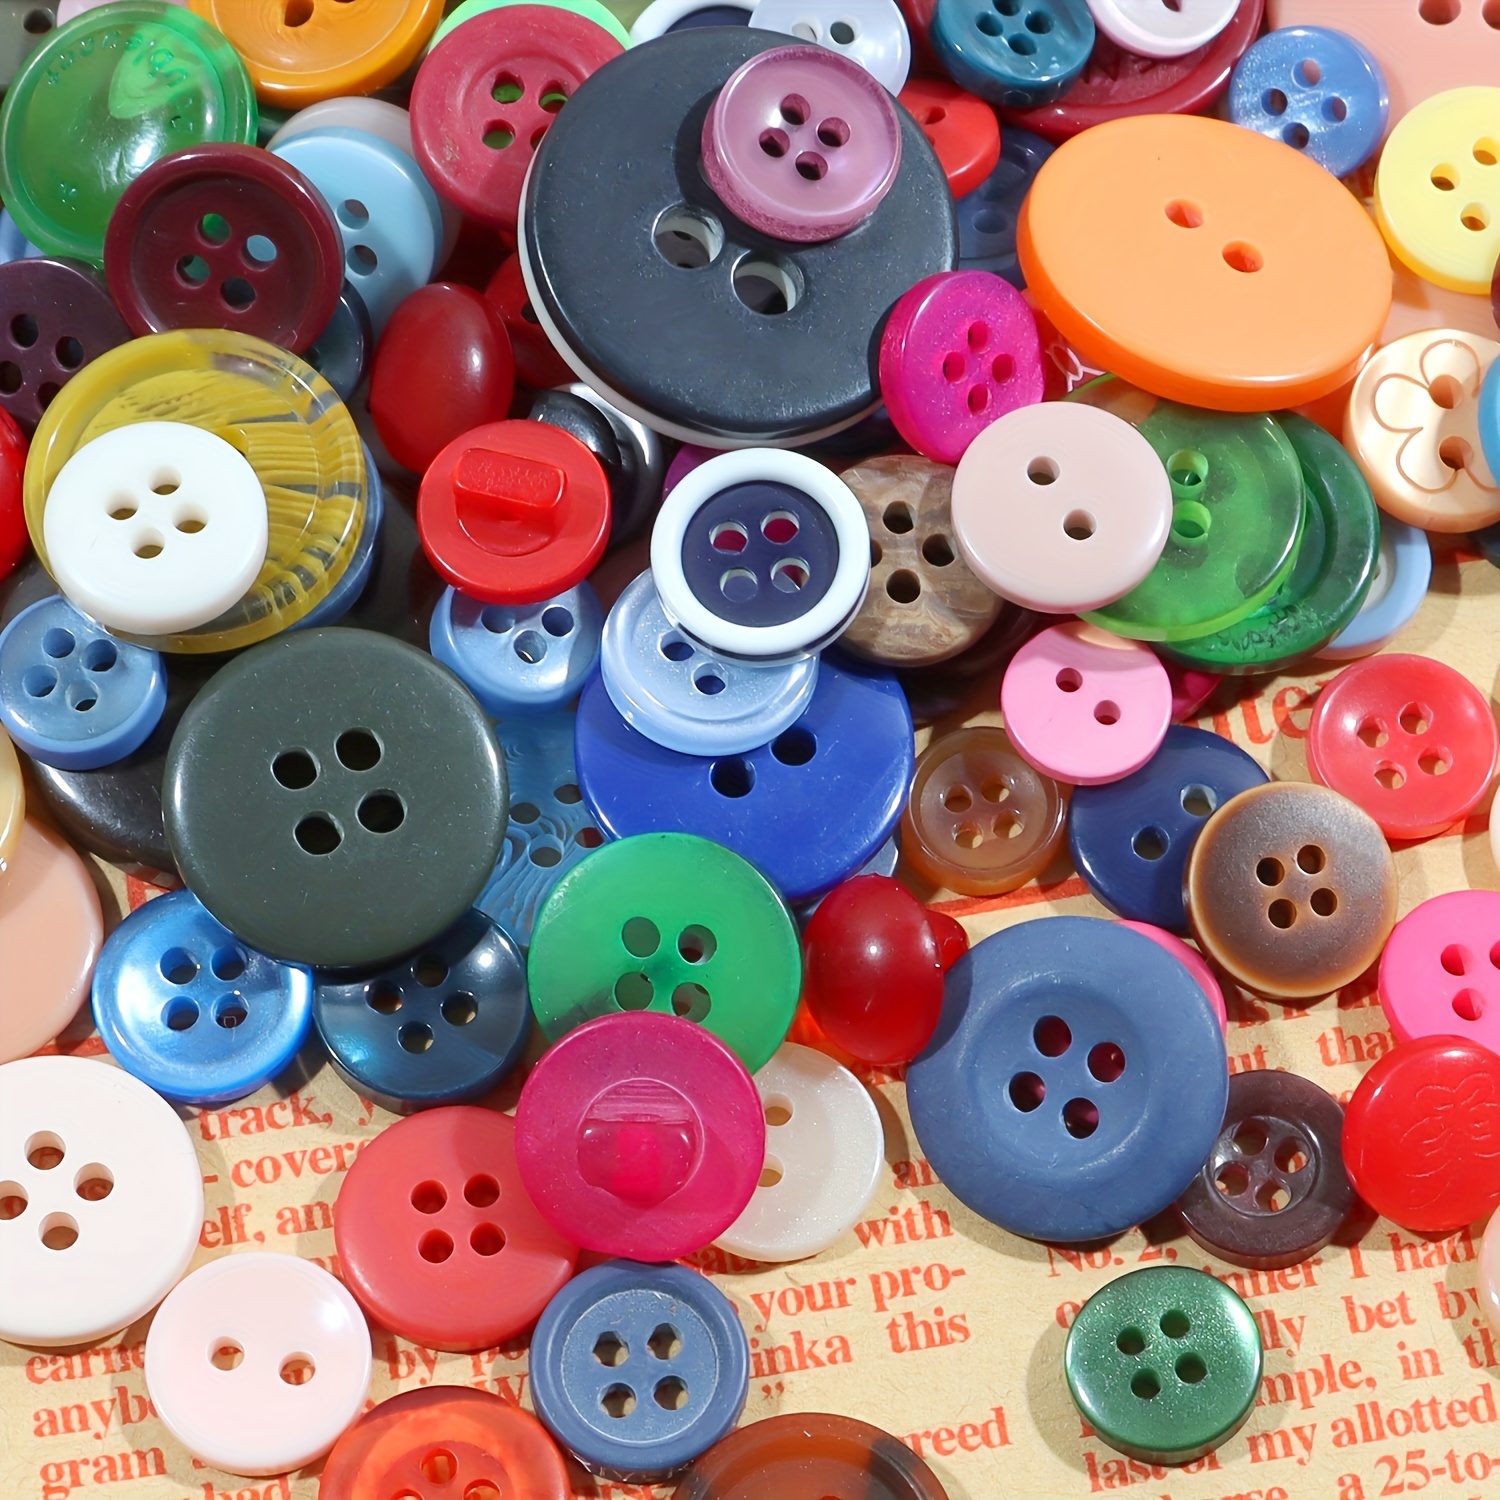 500-700 PCS Assorted Mixed Color Resin Buttons 2 and 4 Holes Round Craft  for Sewing DIY Crafts Children's Manual Button Painting,DIY Handmade  Ornament